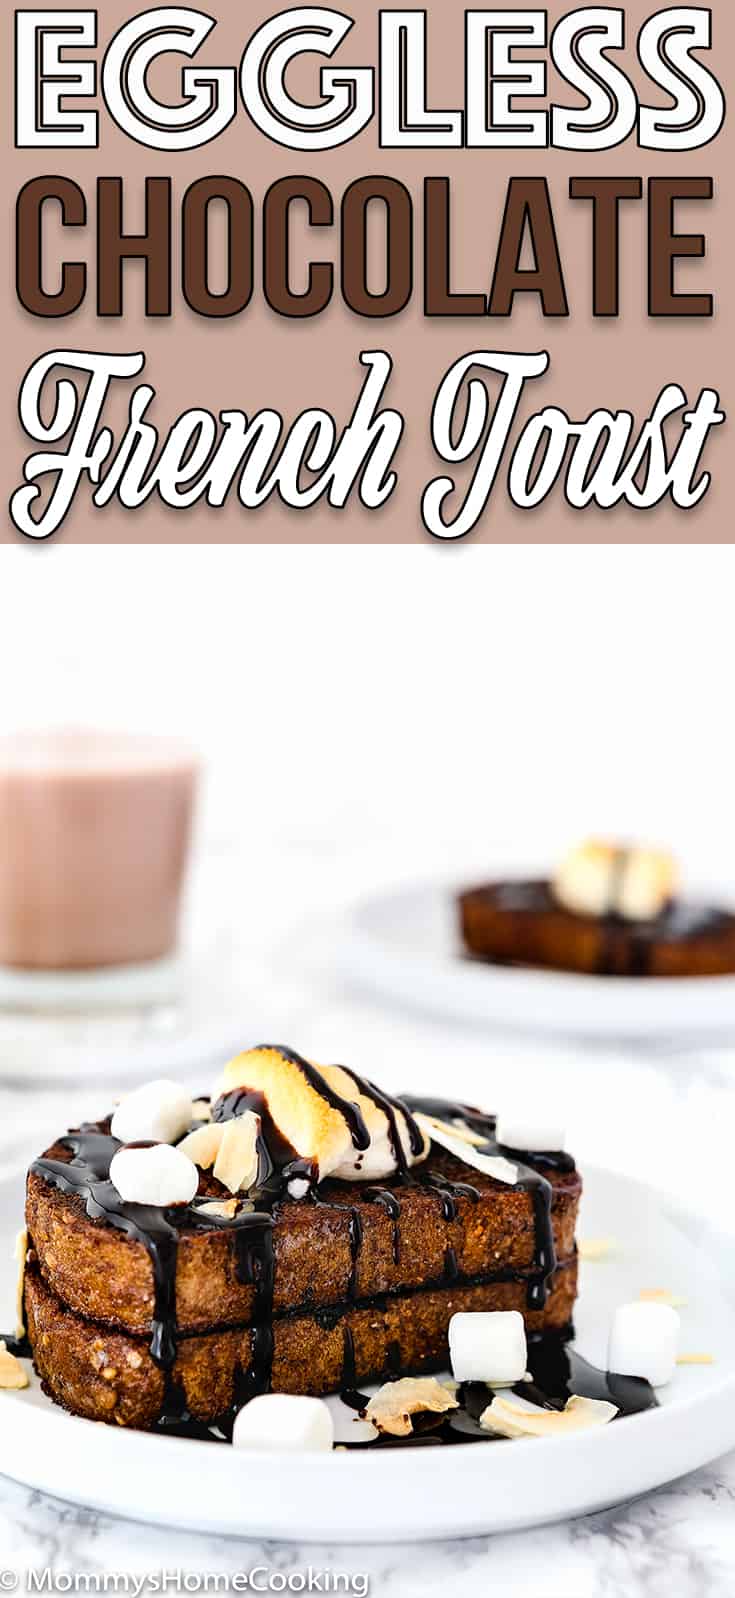 This Easy Eggless Chocolate French Toast is delicious, ridiculously easy to make and will be ready in a flash! With slightly crisp outsides, and light yet custardy insides, this chocolate French toast is perfect to satisfy those sweet-tooth cravings. https://mommyshome cooking.com